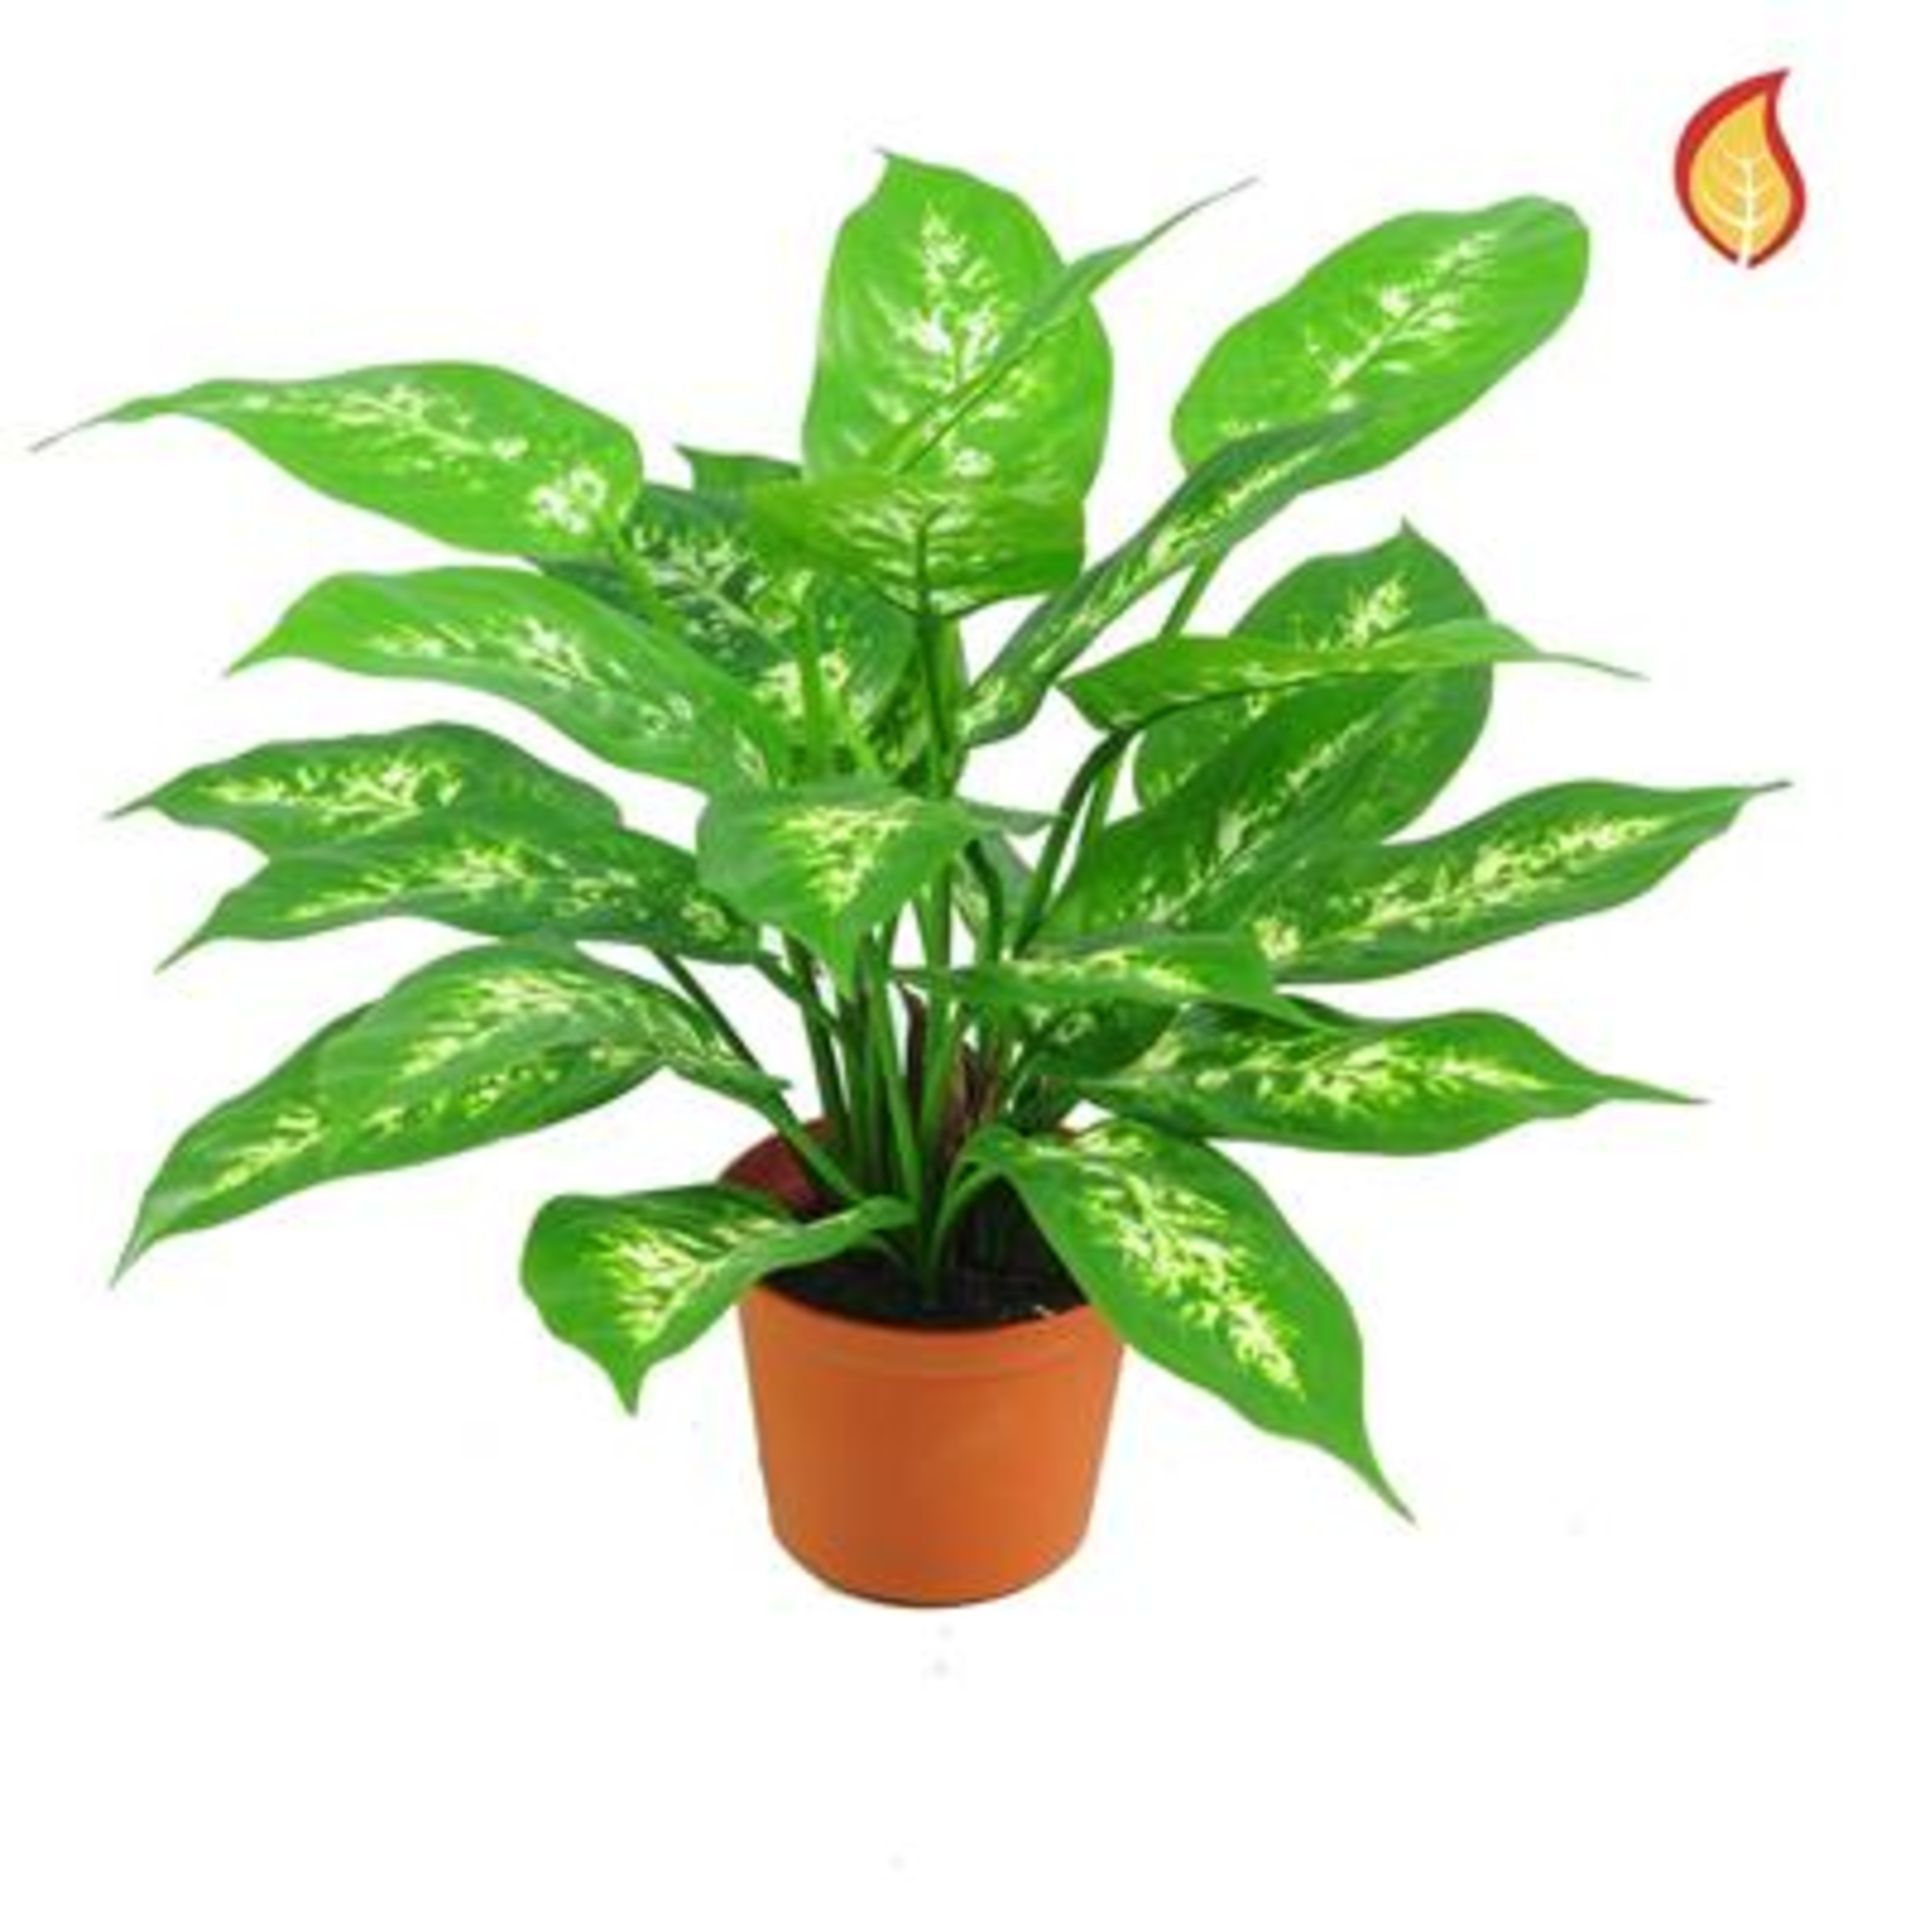 3 x Artificial Dieffenbachia potted plant FR - New and unused - Image 2 of 2